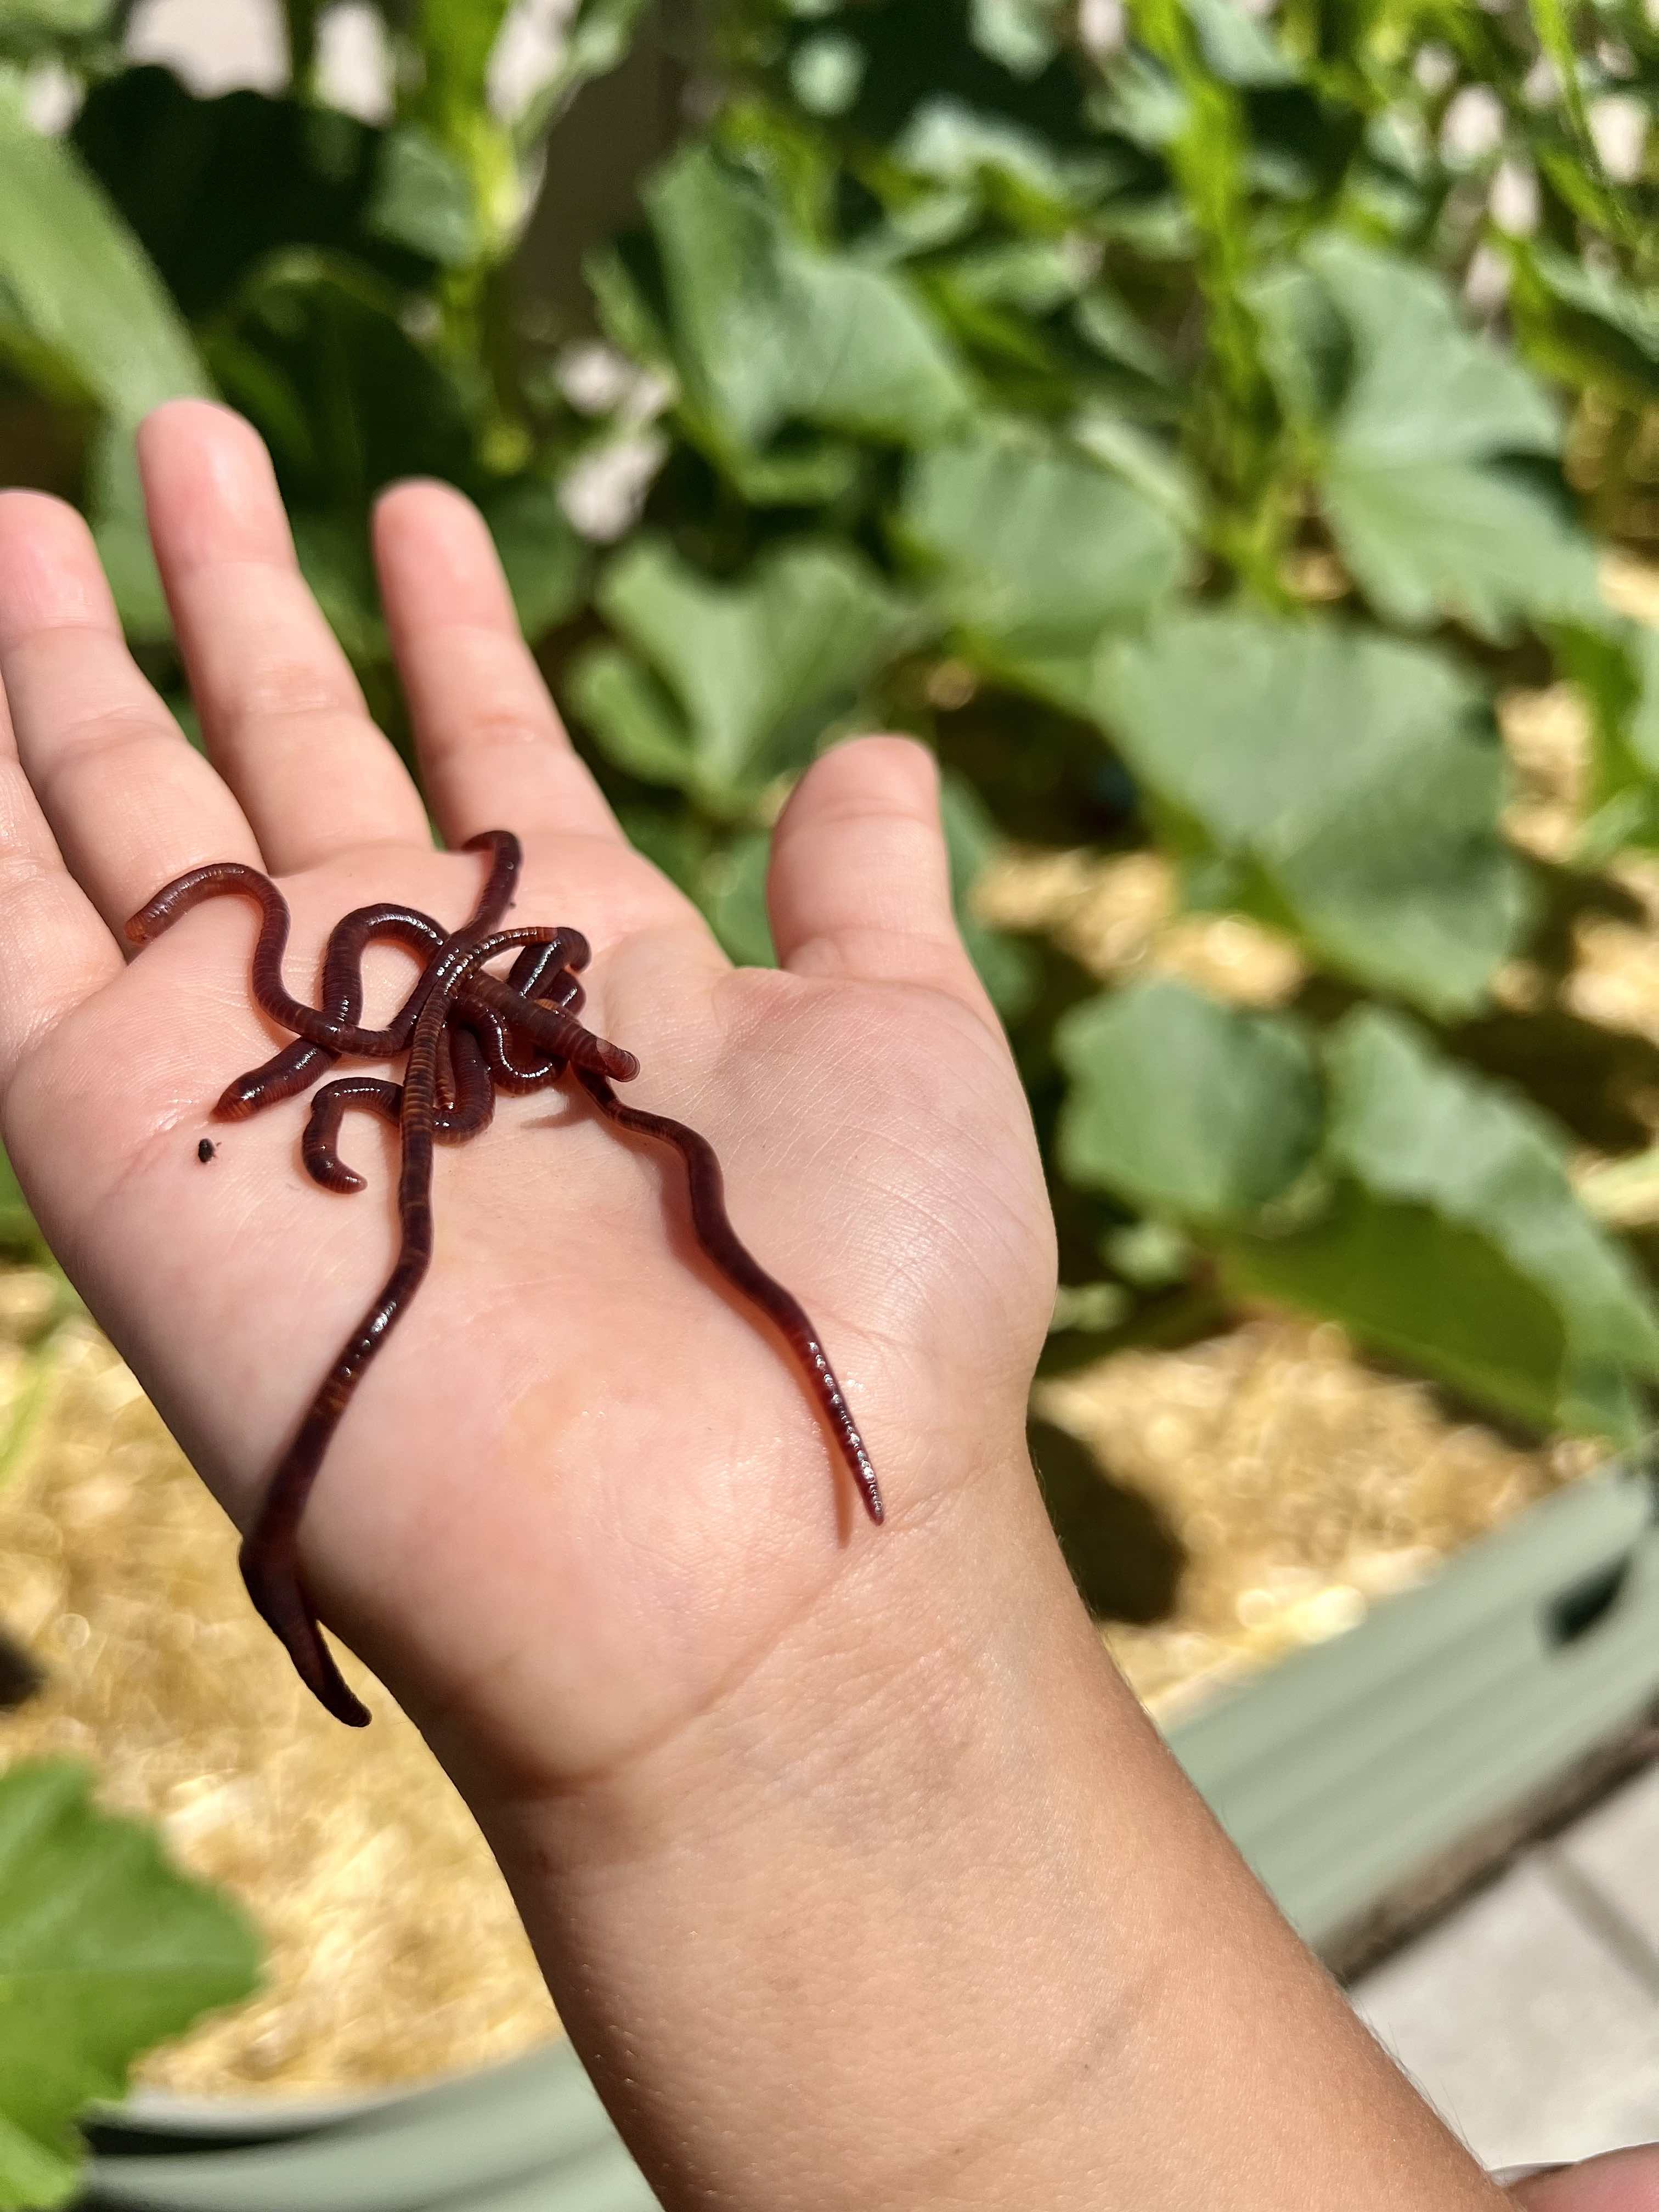 Who Sells Red Wiggler Worms Near Me